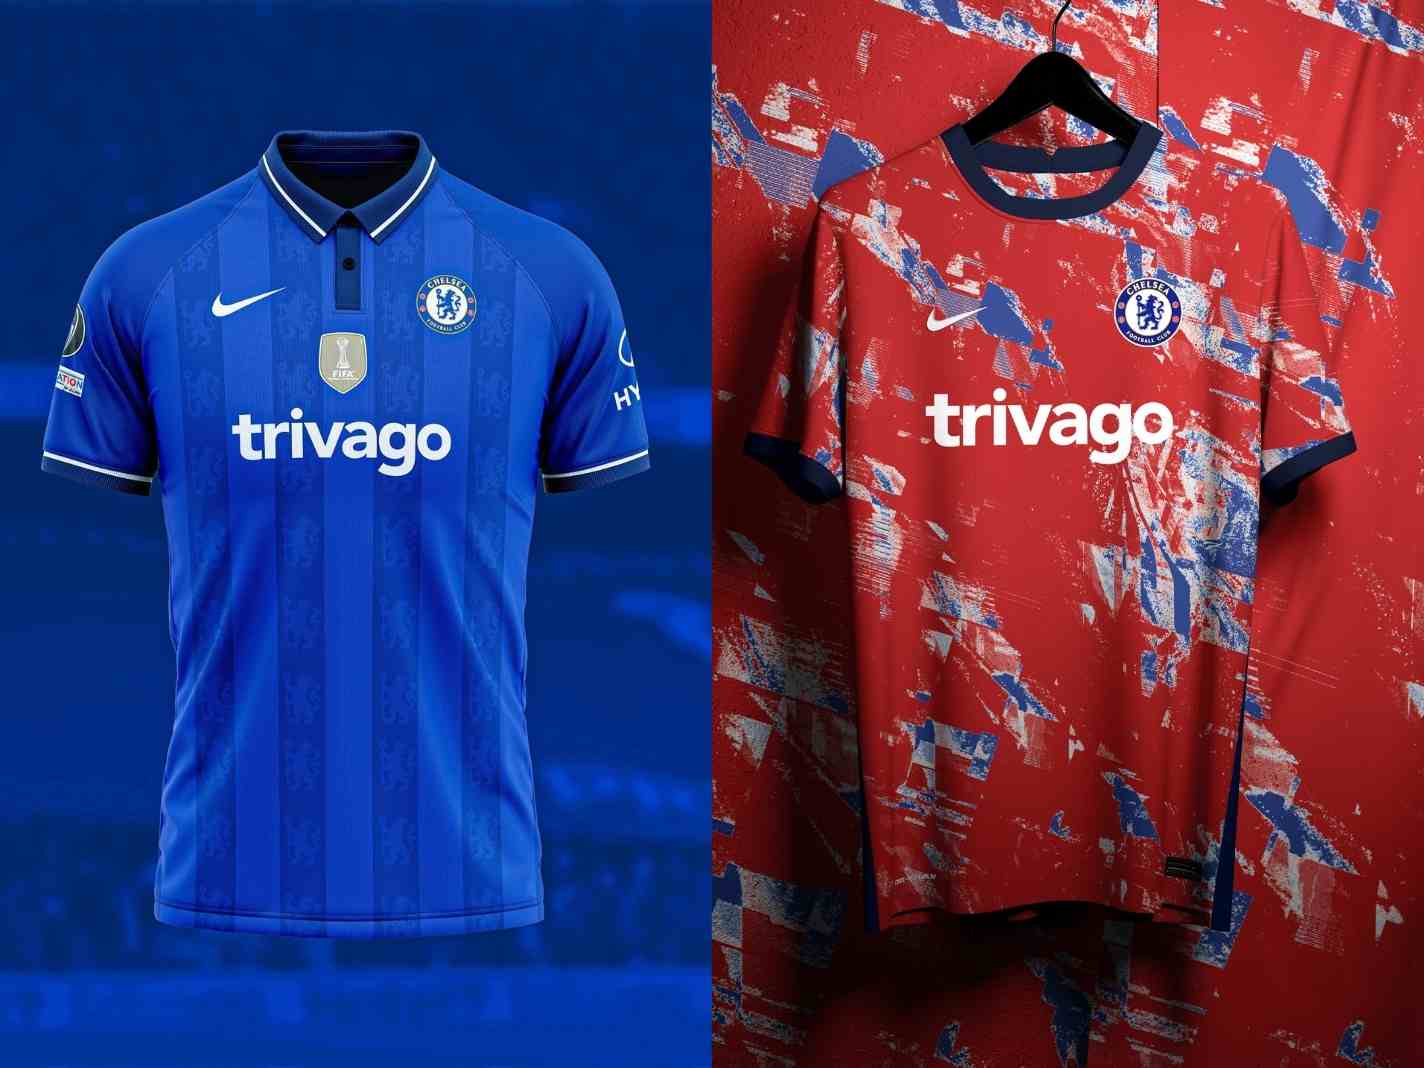 Concept kits show why Trivago should front Chelsea kits instead of Three